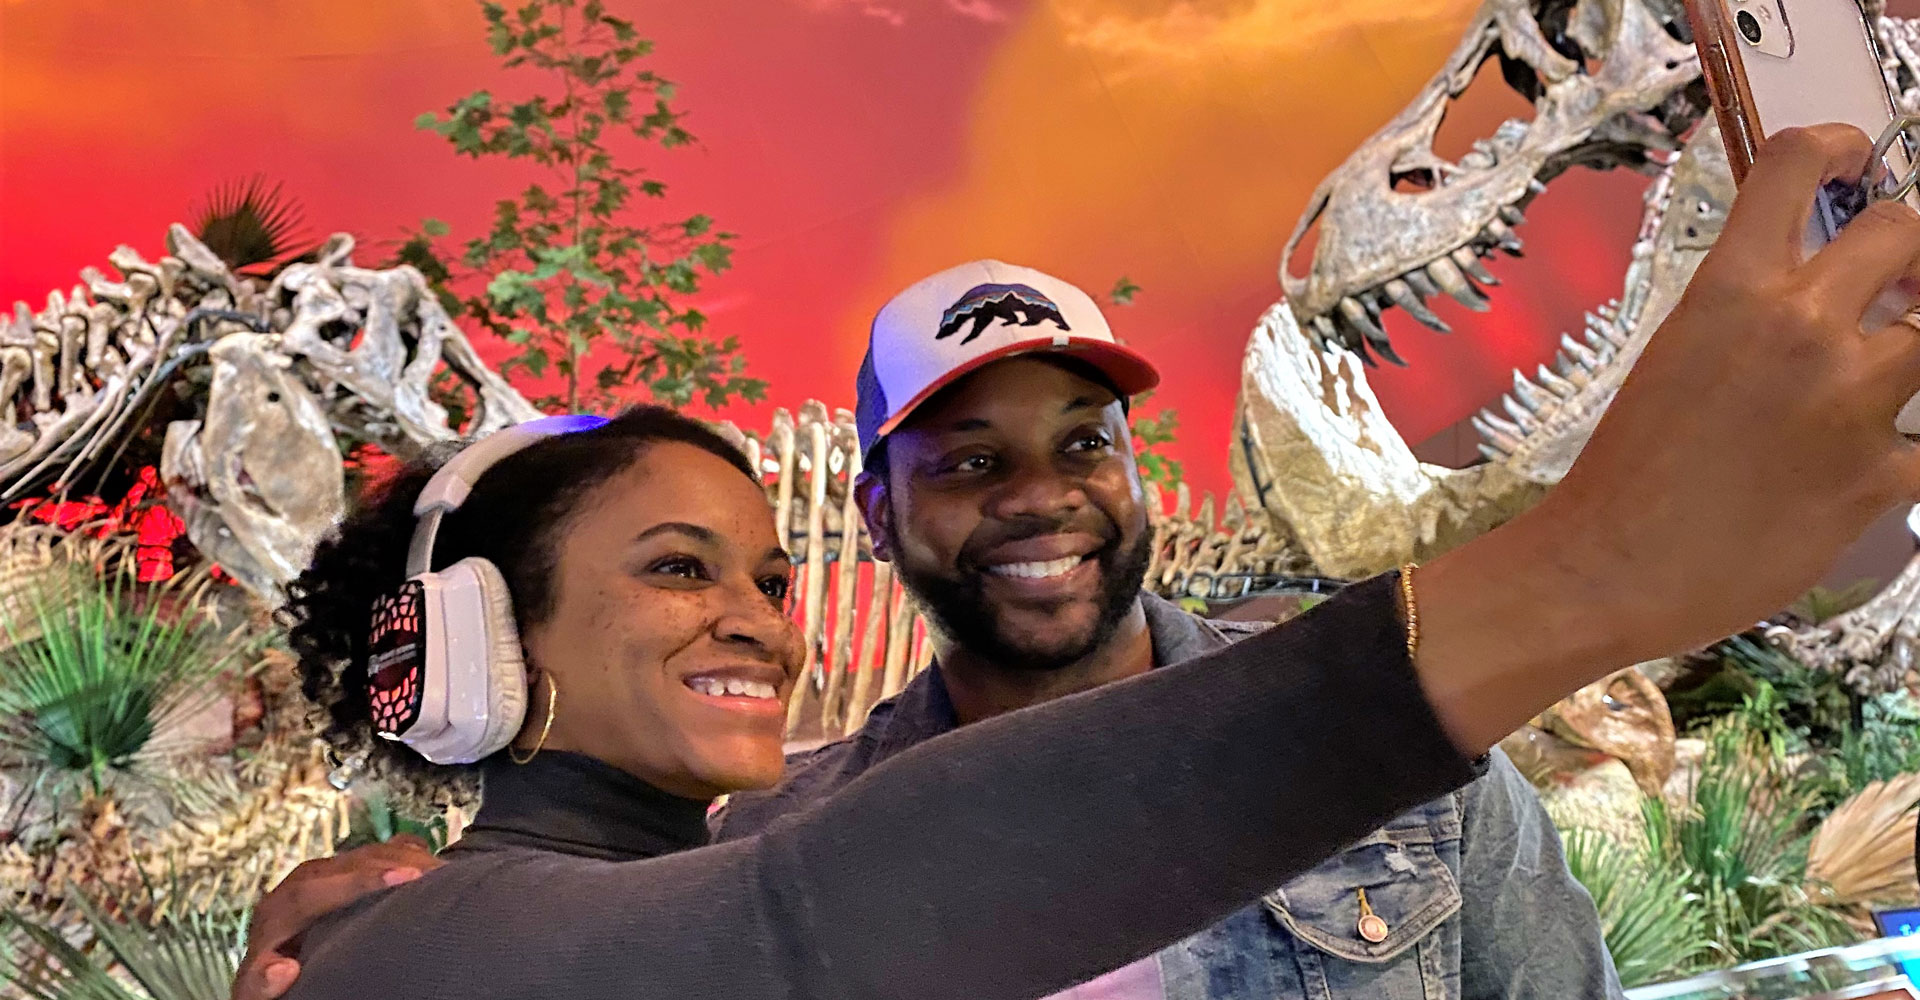 Woman wearing Silent Disco headphones and a man wearing a baseball cap, smiling and posing for a selfie in front of a T. rex inside Dinosphere.